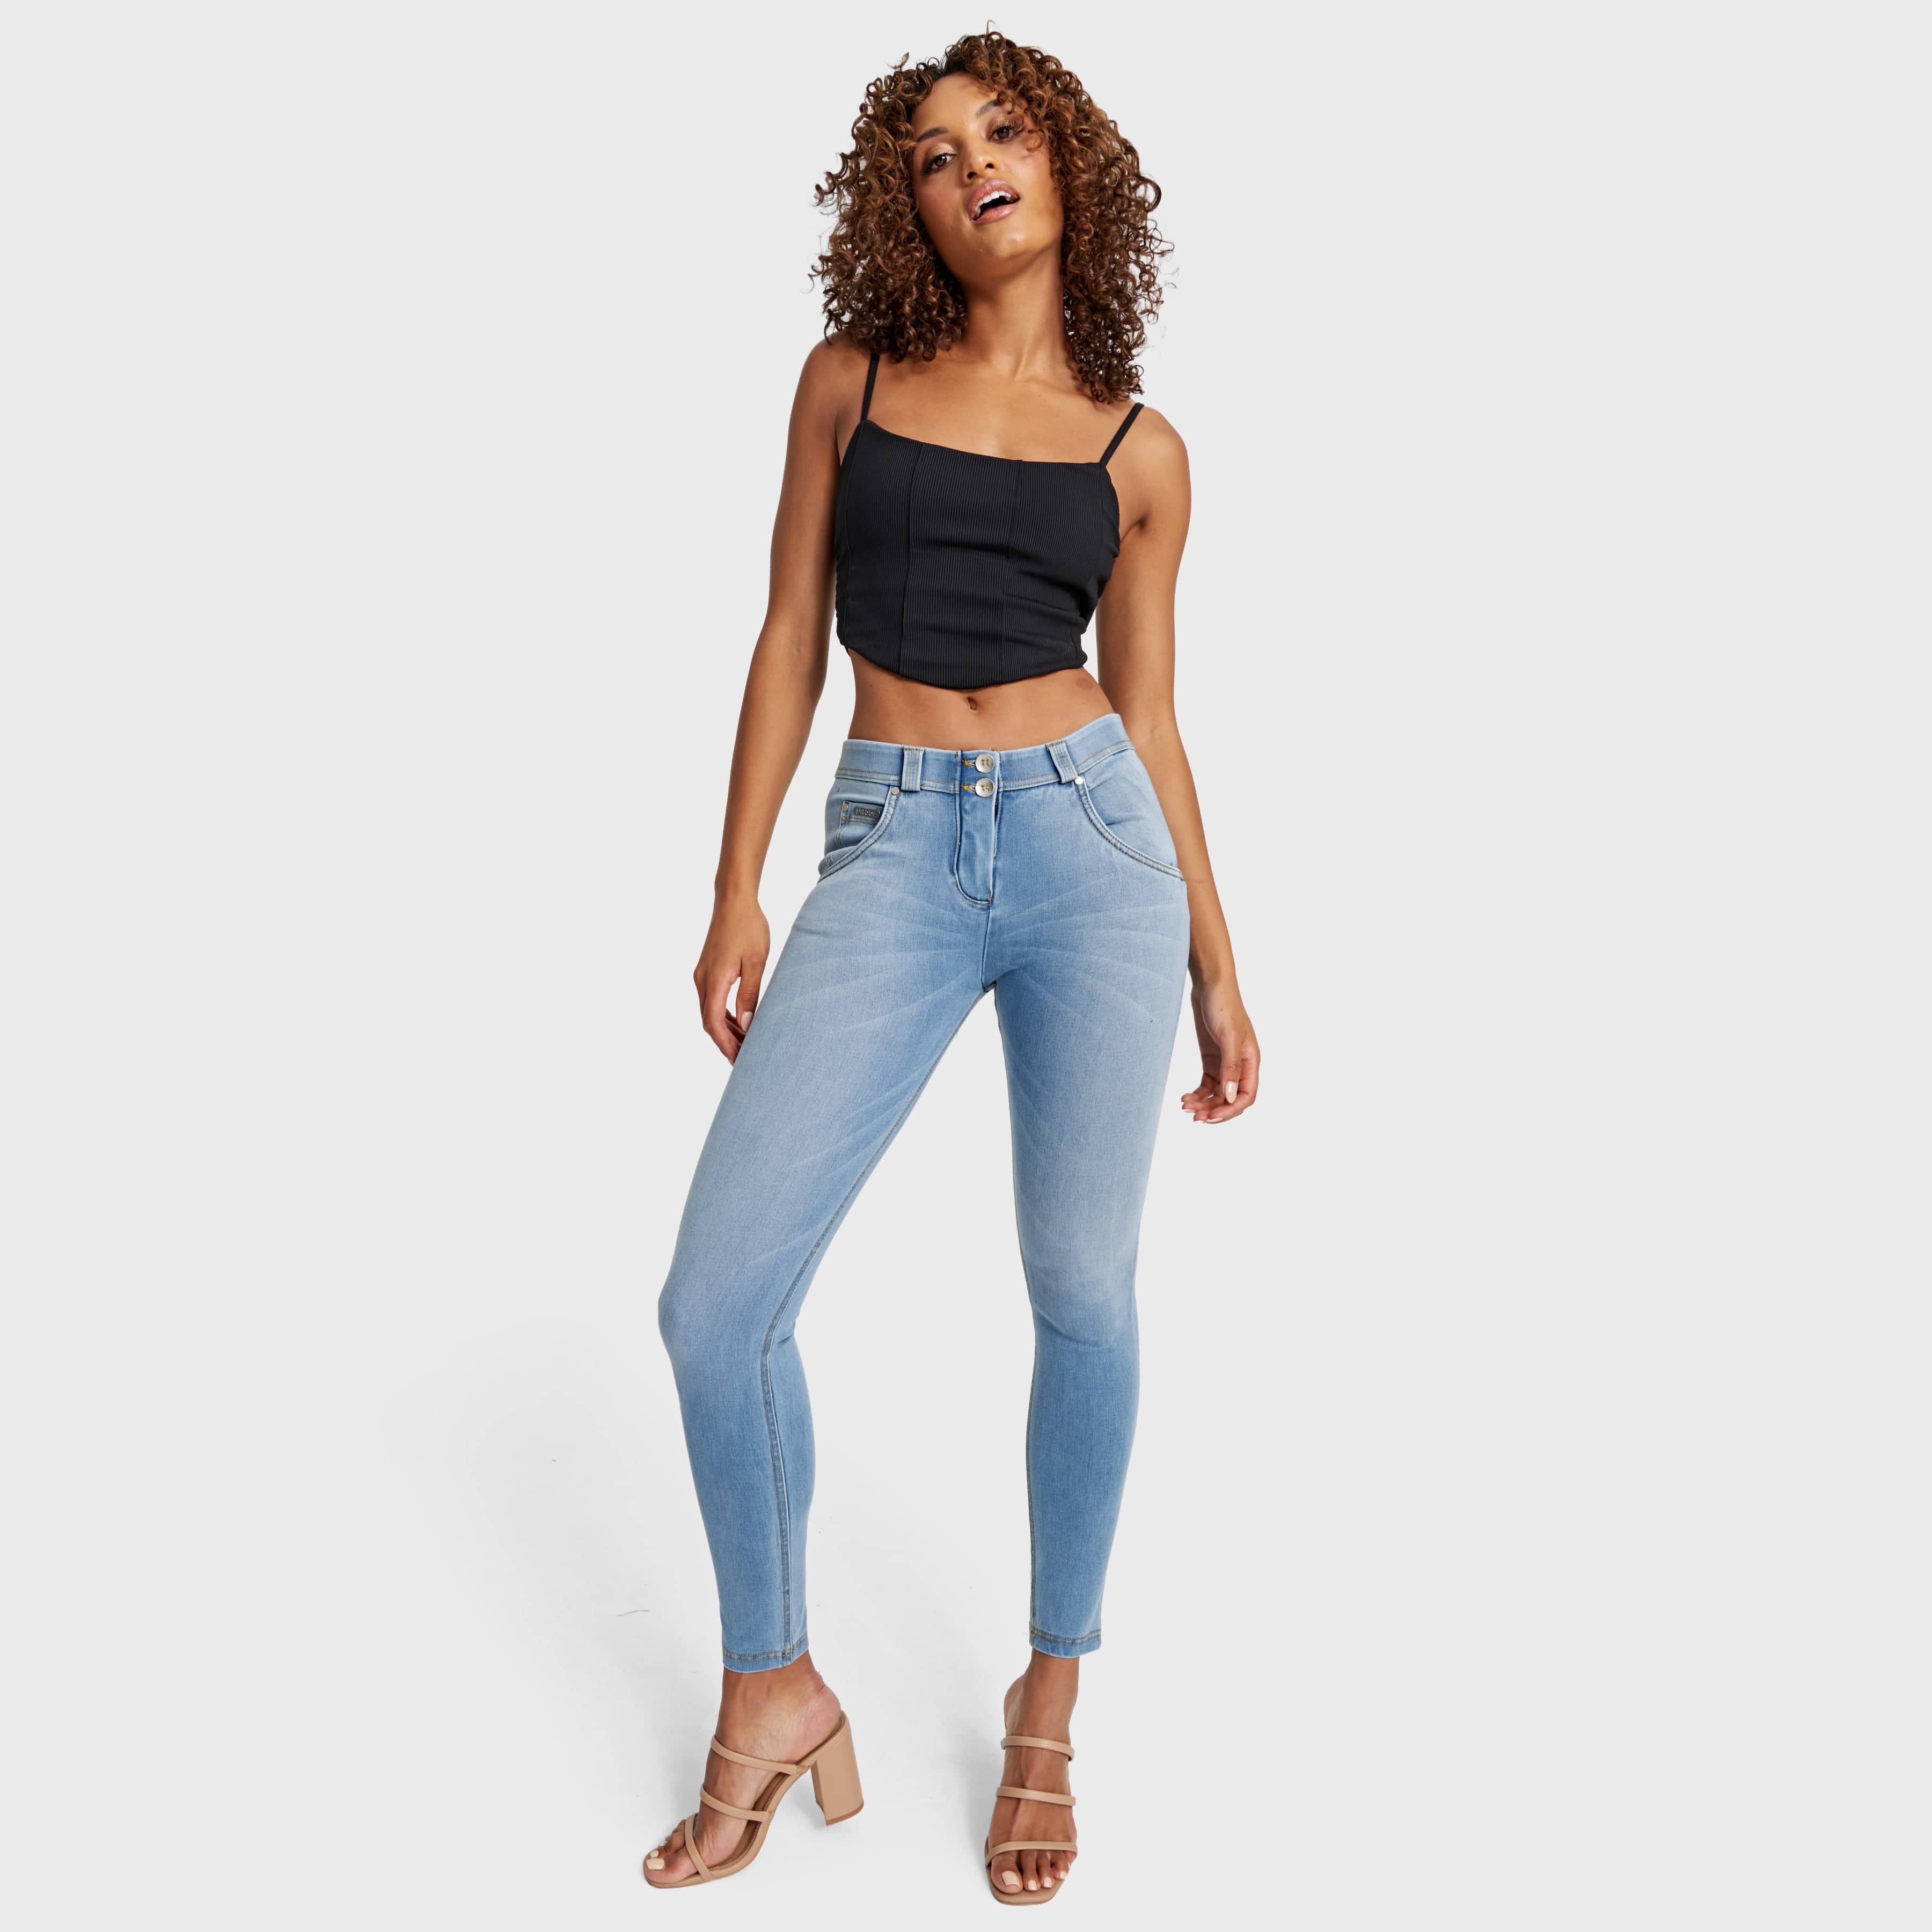 WR.UP® Snug Jeans - Mid Rise - Full Length - Light Blue + Yellow Stitching 3